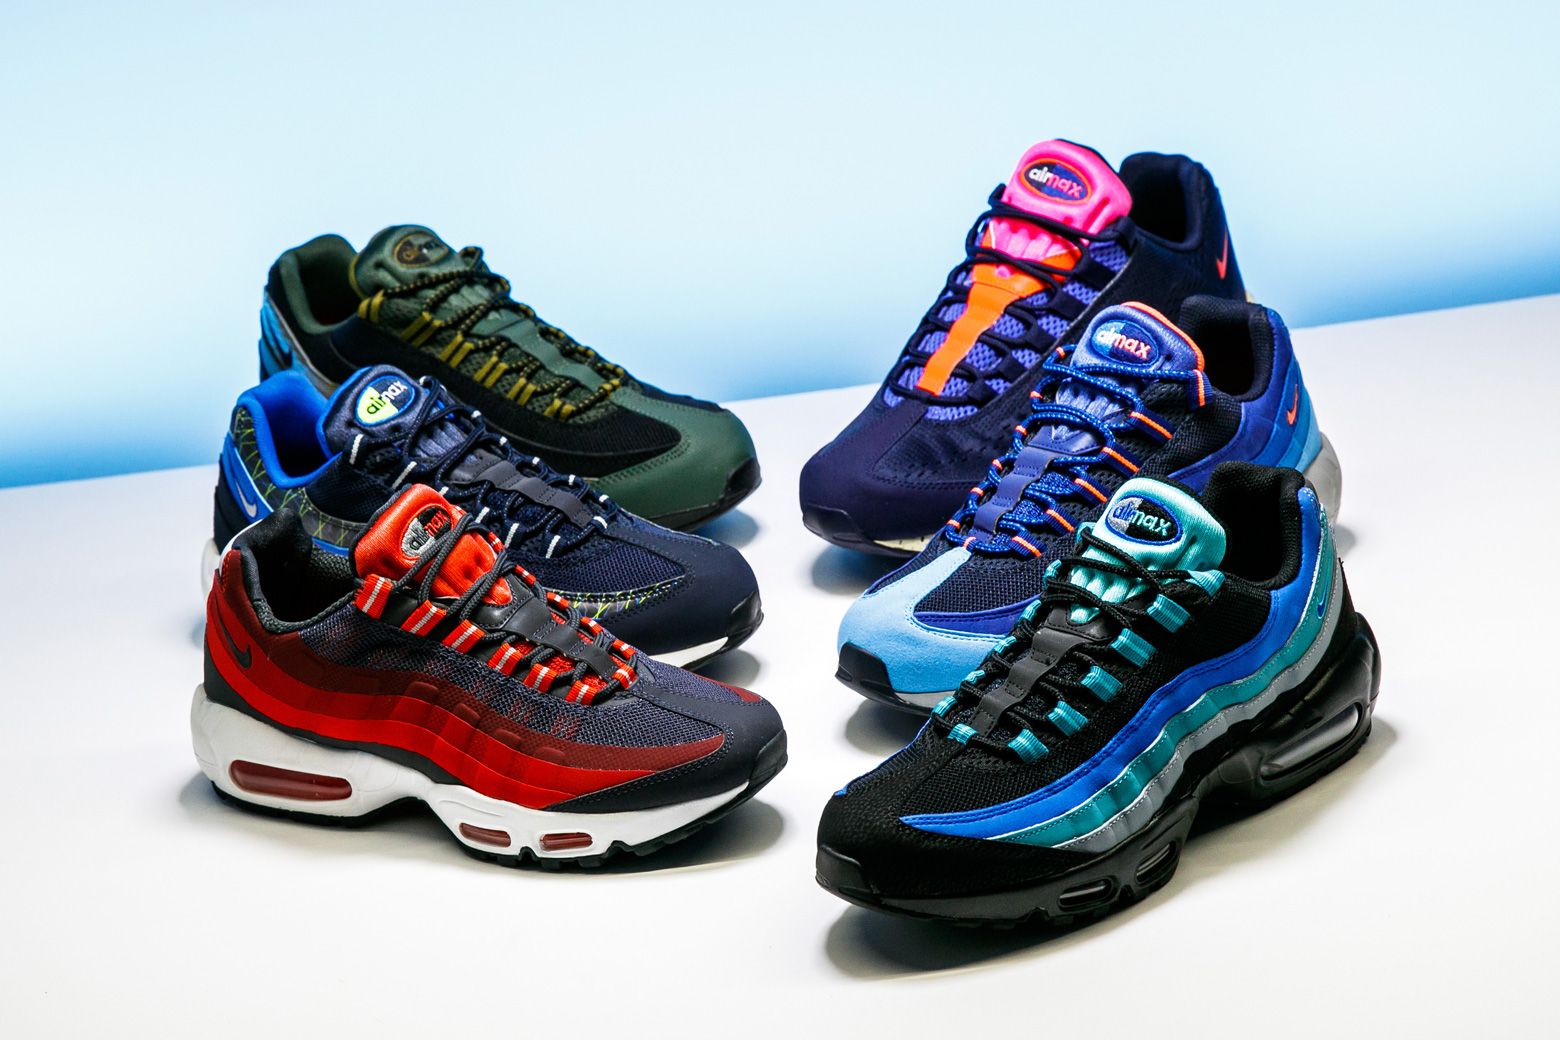 Stadium Goods on Twitter: "Twenty-plus years and hundreds of variations later, which Air Max 95 colorways the best? https://t.co/MgV2h3aWGO https://t.co/hc9HE48qWM" / Twitter